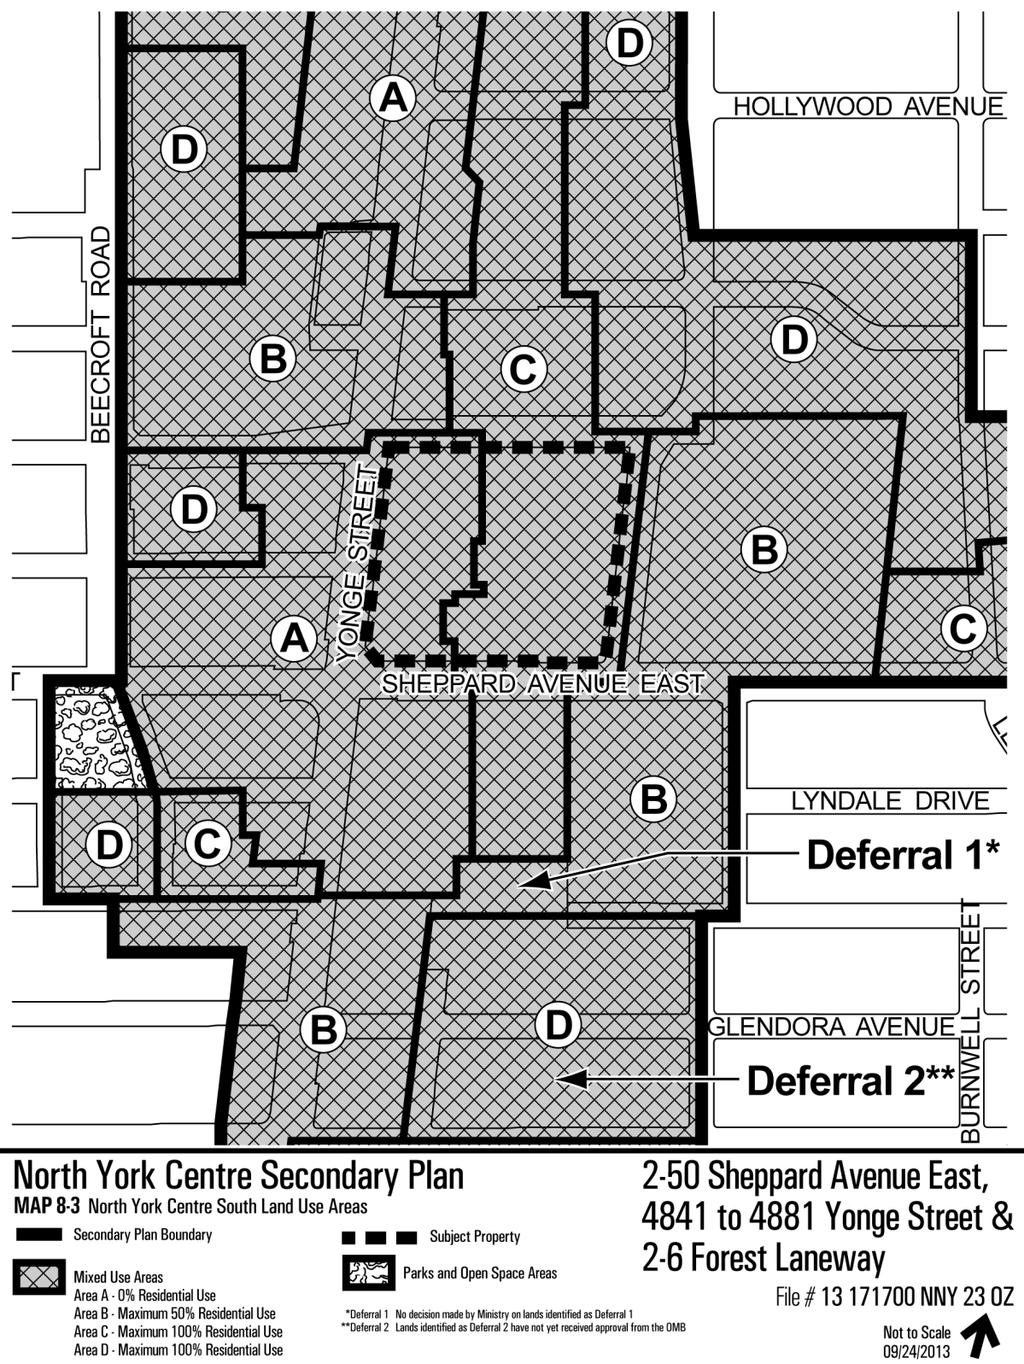 Attachment 5: North York Centre Secondary Plan Land Uses Staff report for